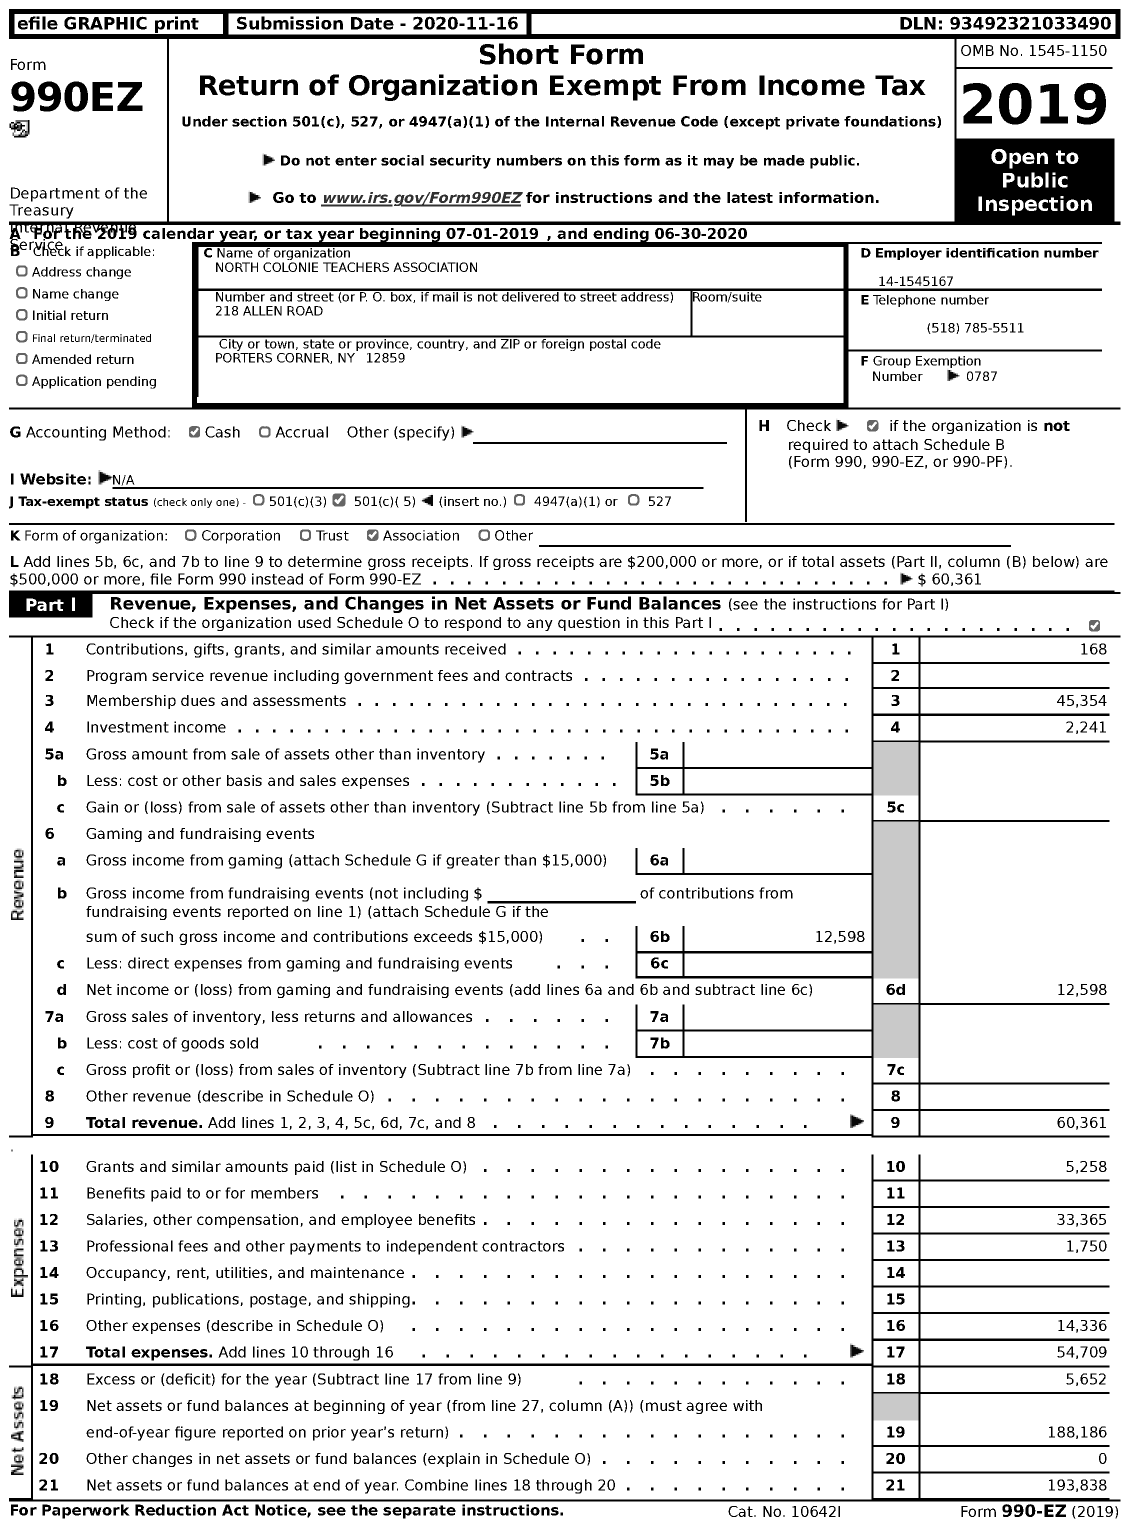 Image of first page of 2019 Form 990EZ for American Federation of Teachers - 2875 North Colonie Teachers Associa